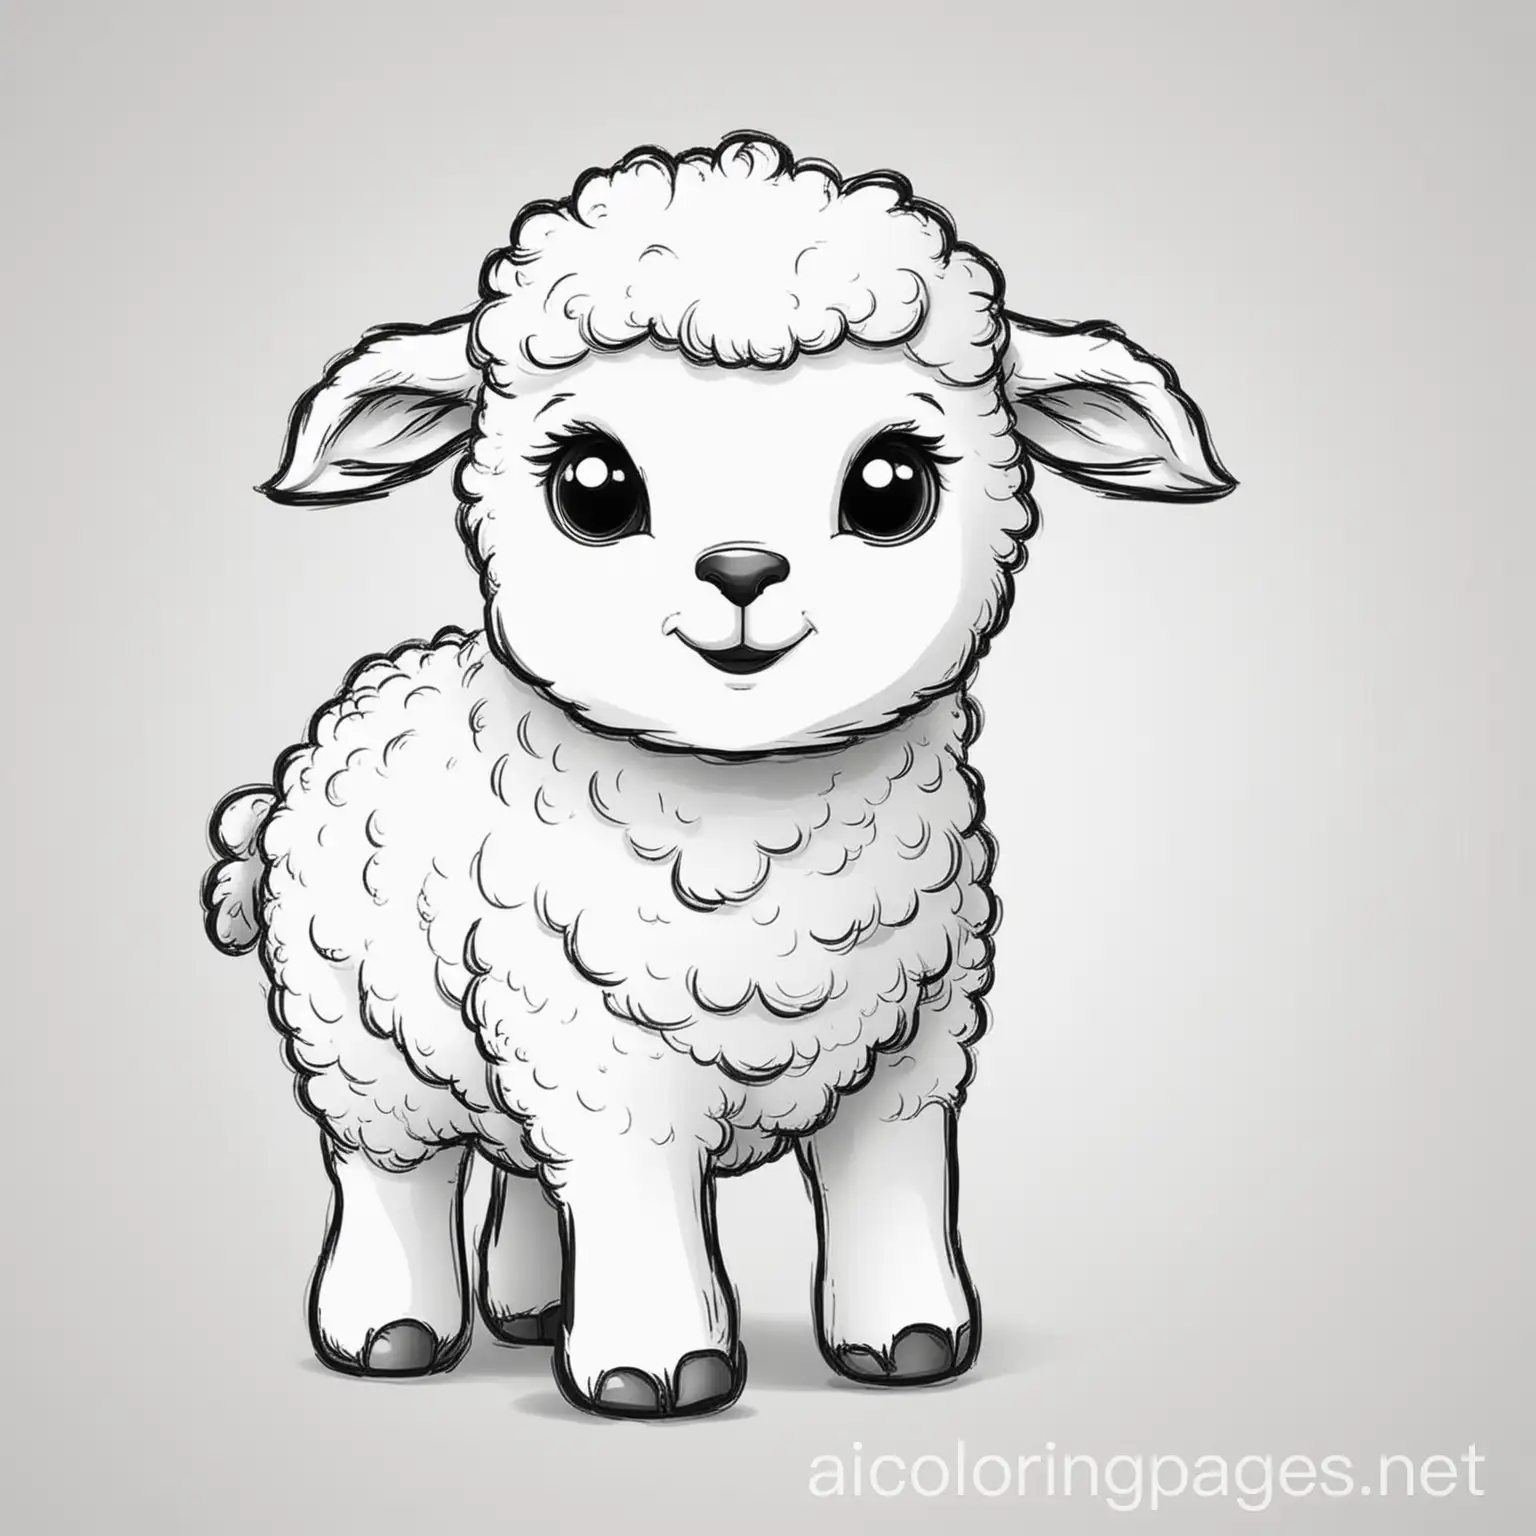 Adorable-Baby-Sheep-Coloring-Page-on-White-Background-Simple-Line-Art-for-Kids